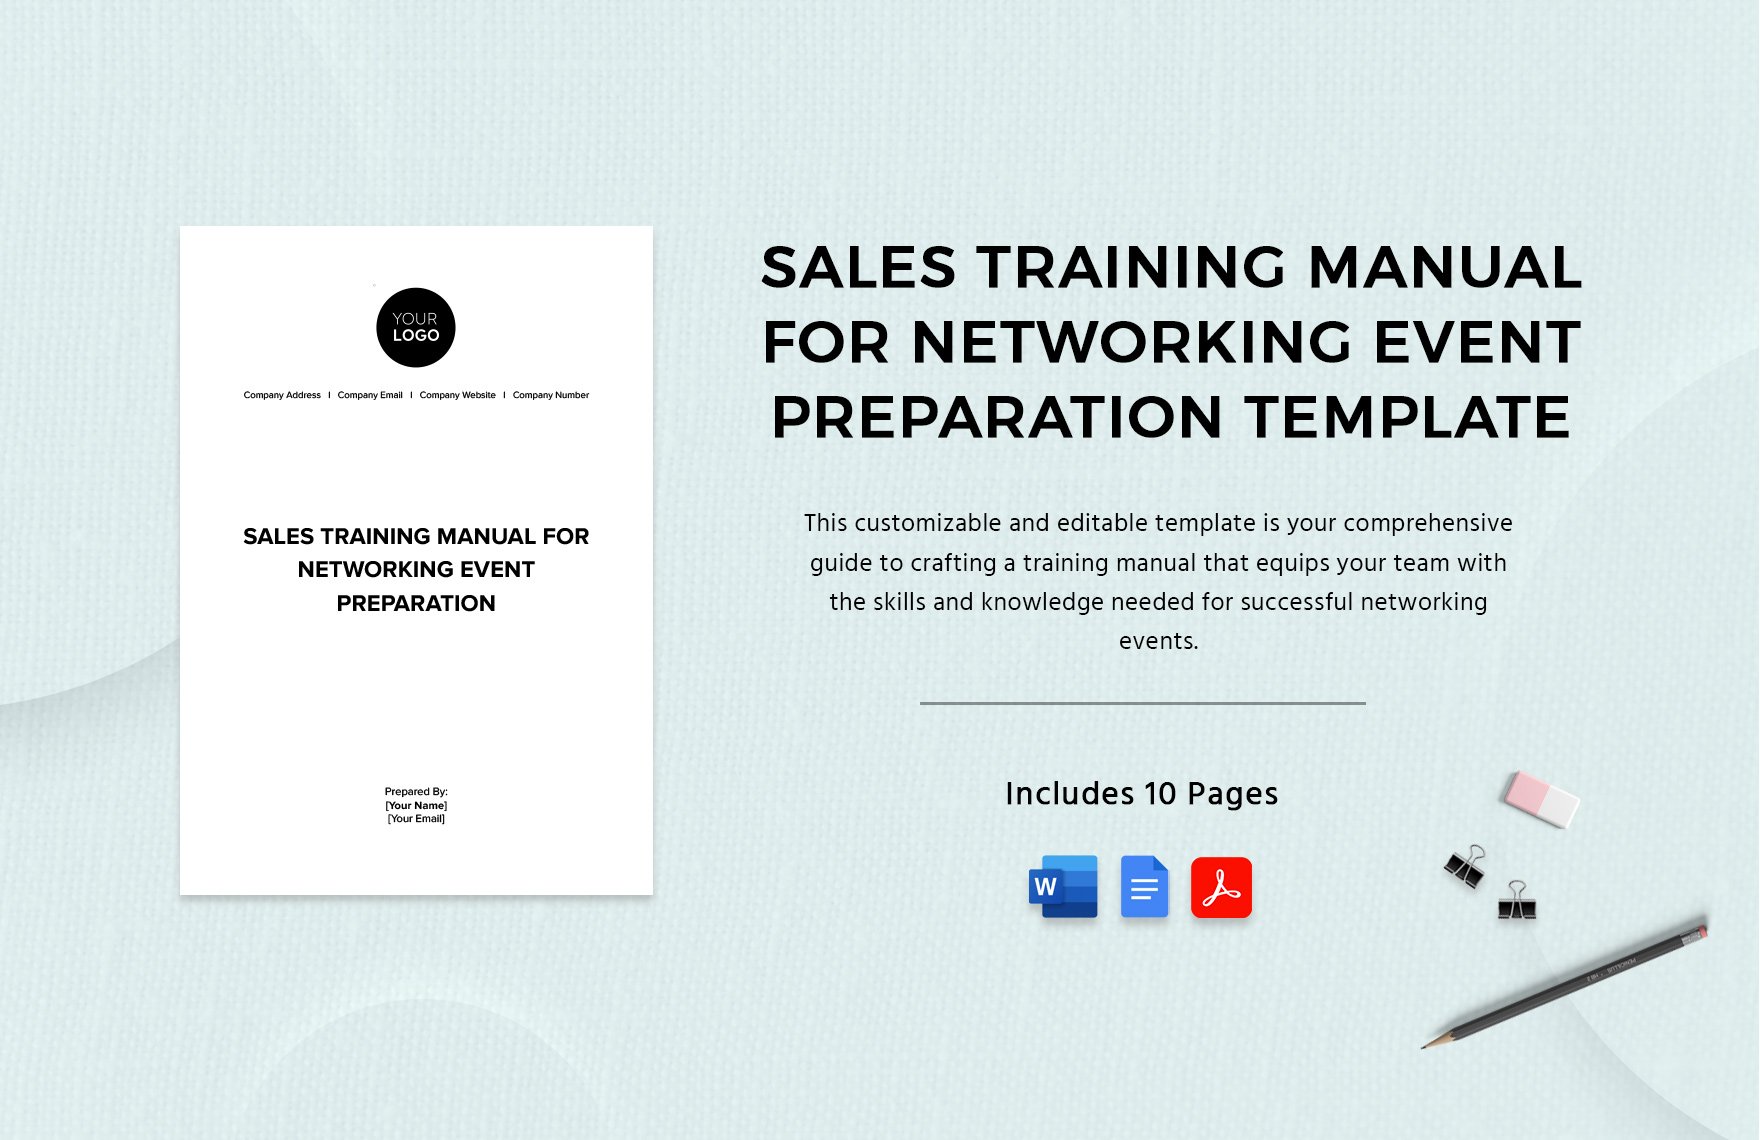 Sales Training Manual for Networking Event Preparation Template